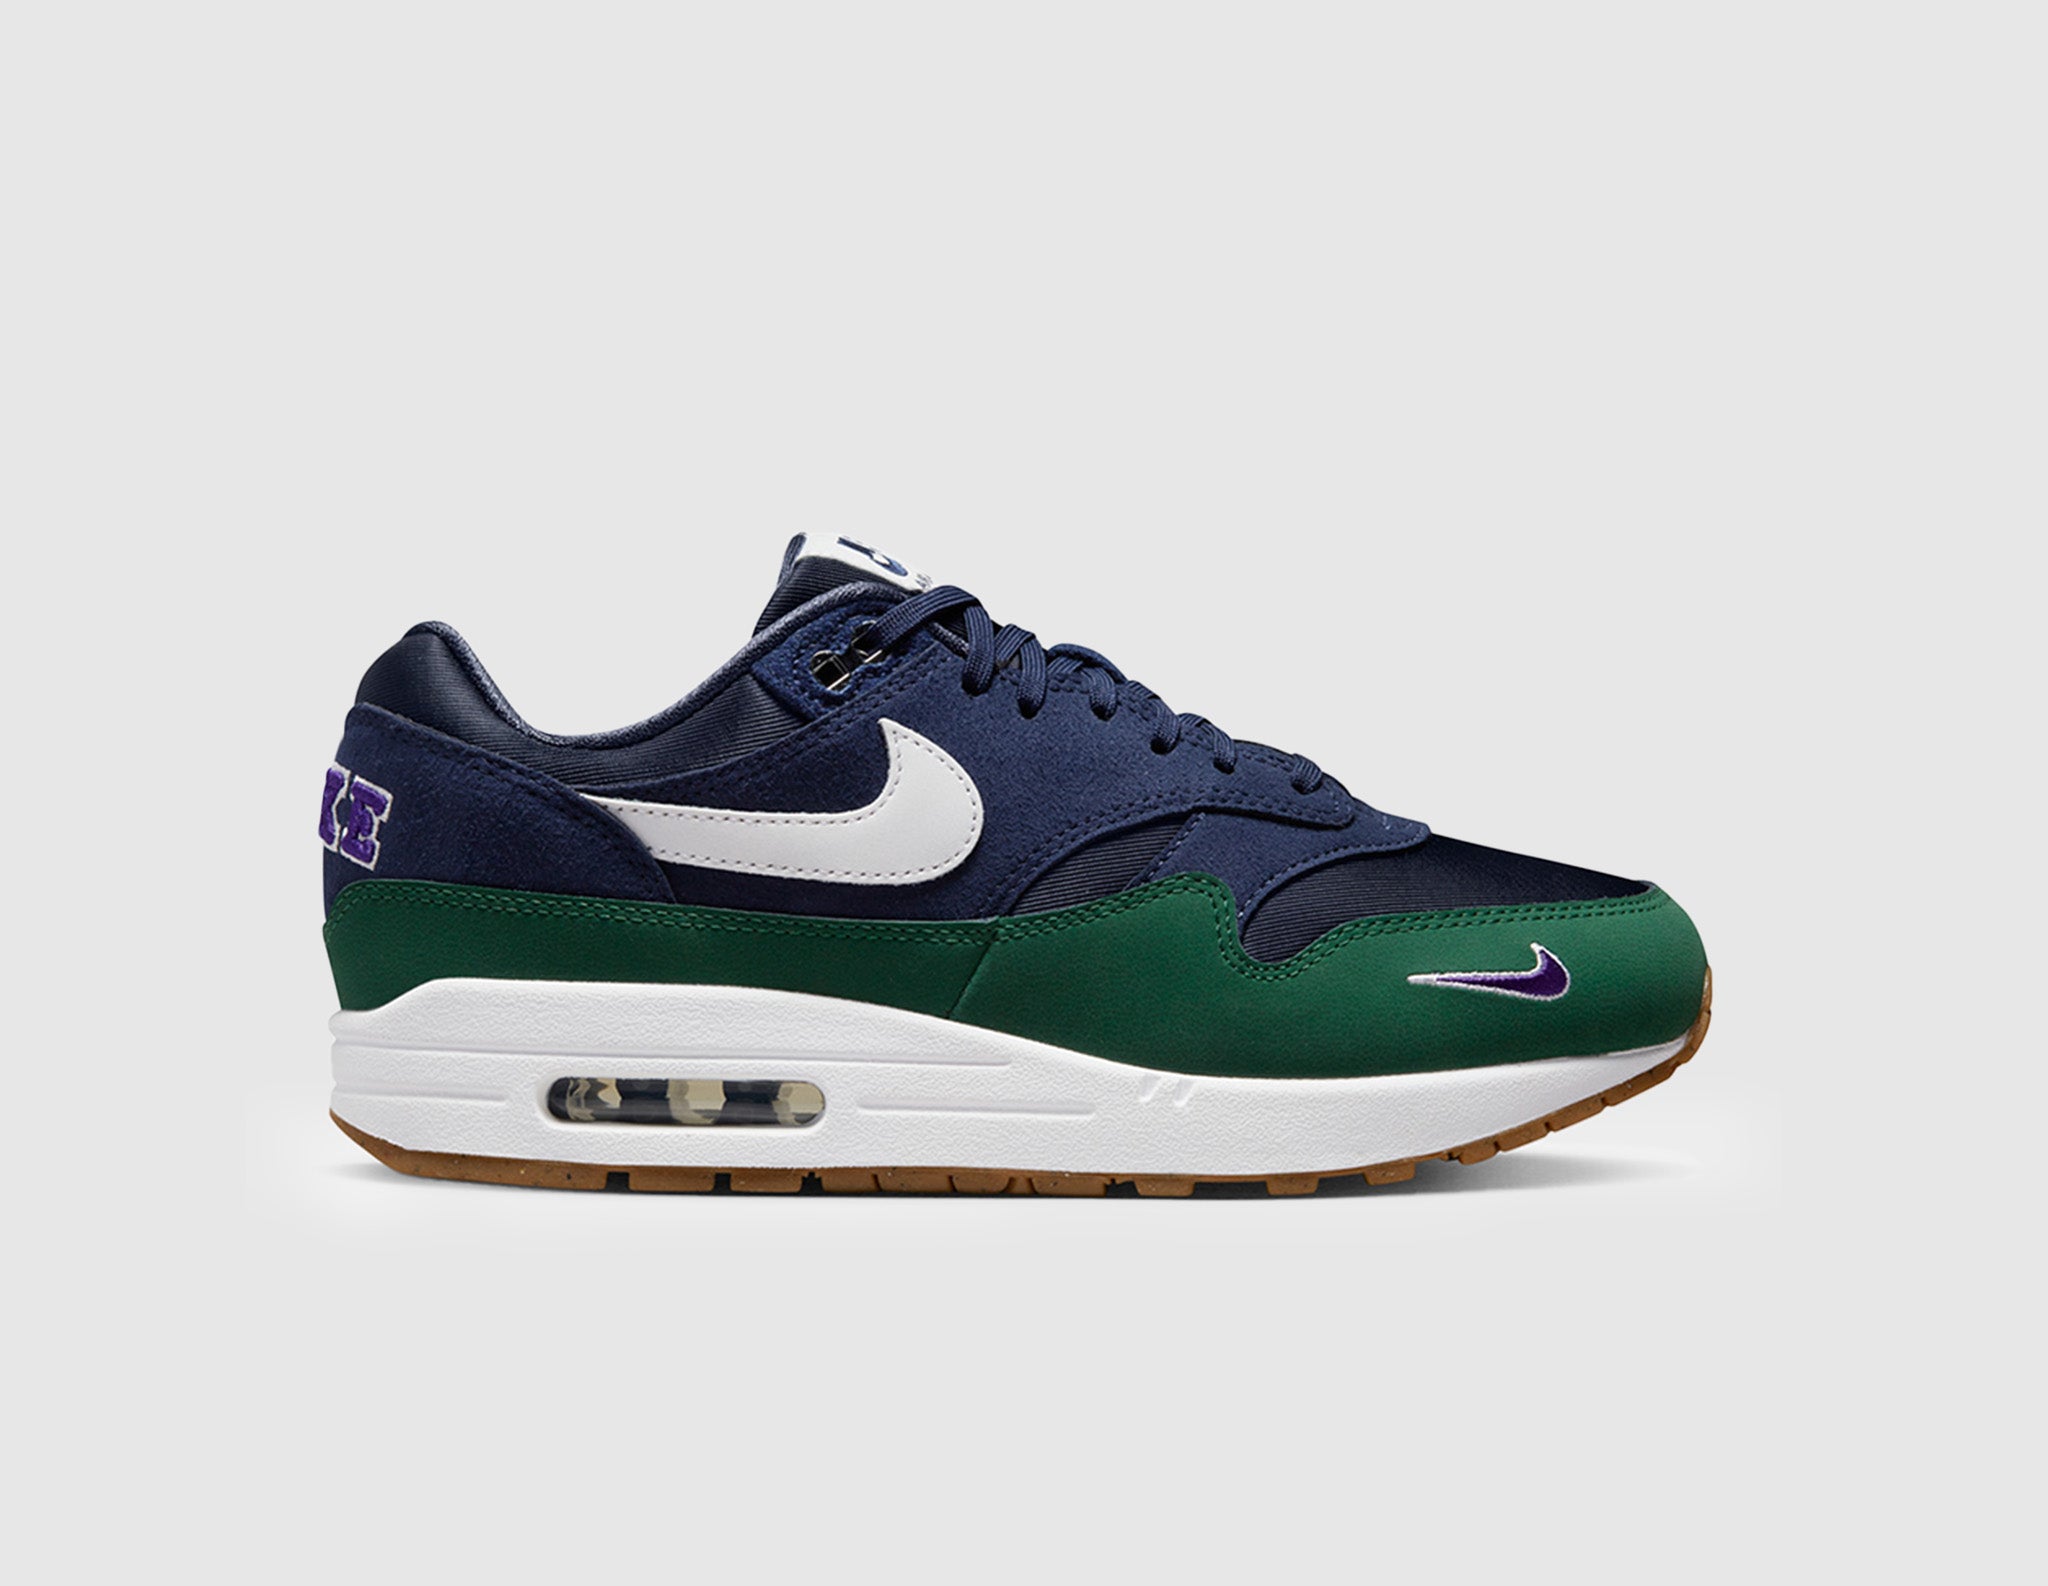 Look Out For The Nike WMNS Air Max 1 Obsidian •